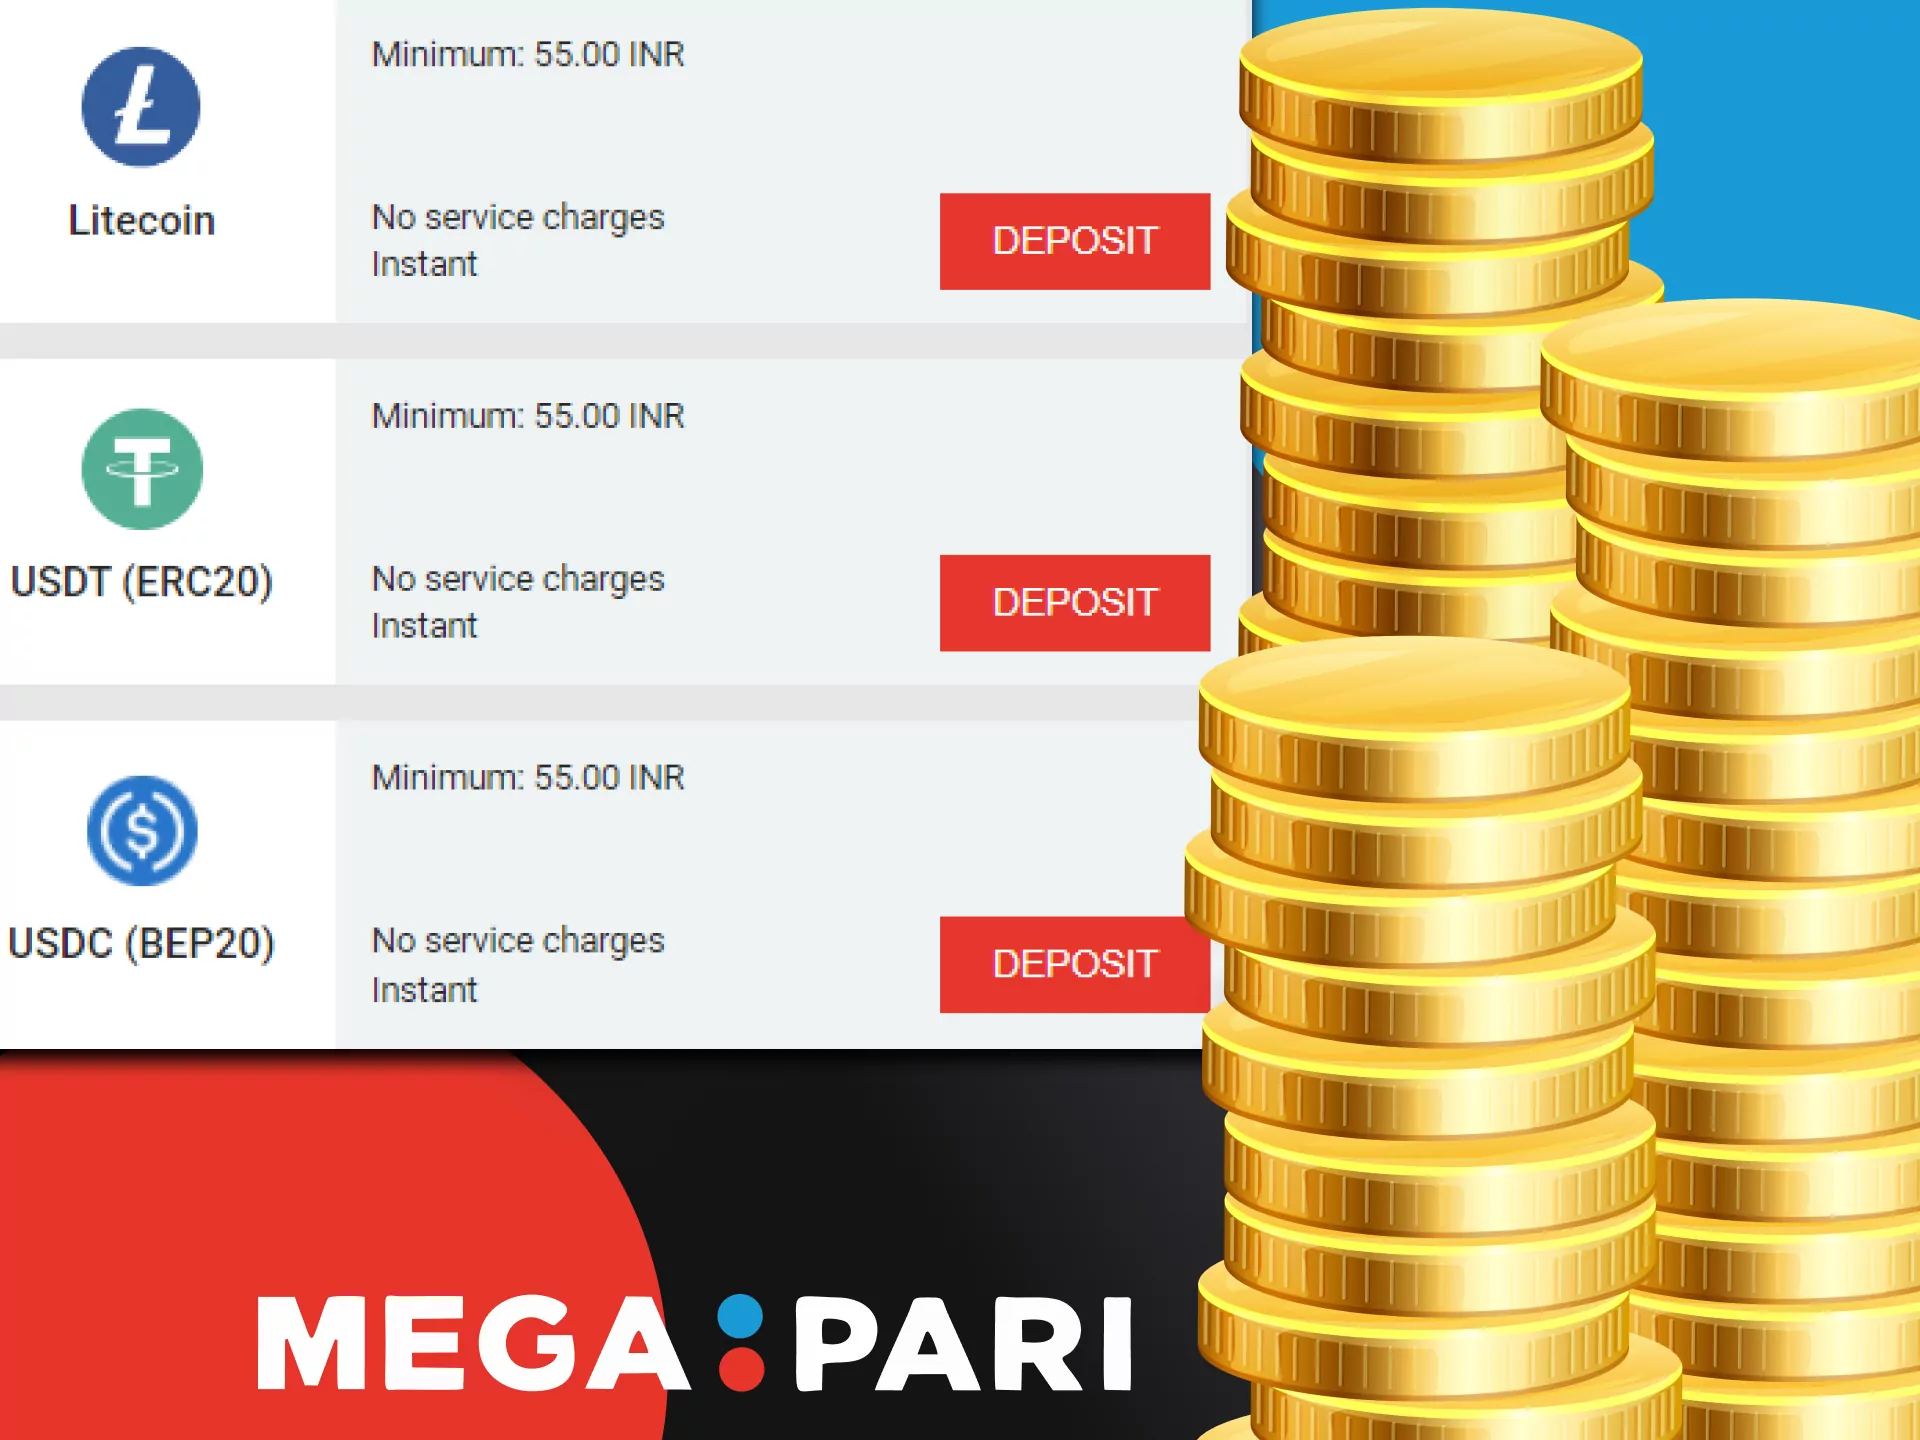 Learn the process of depositing funds on Megapari.